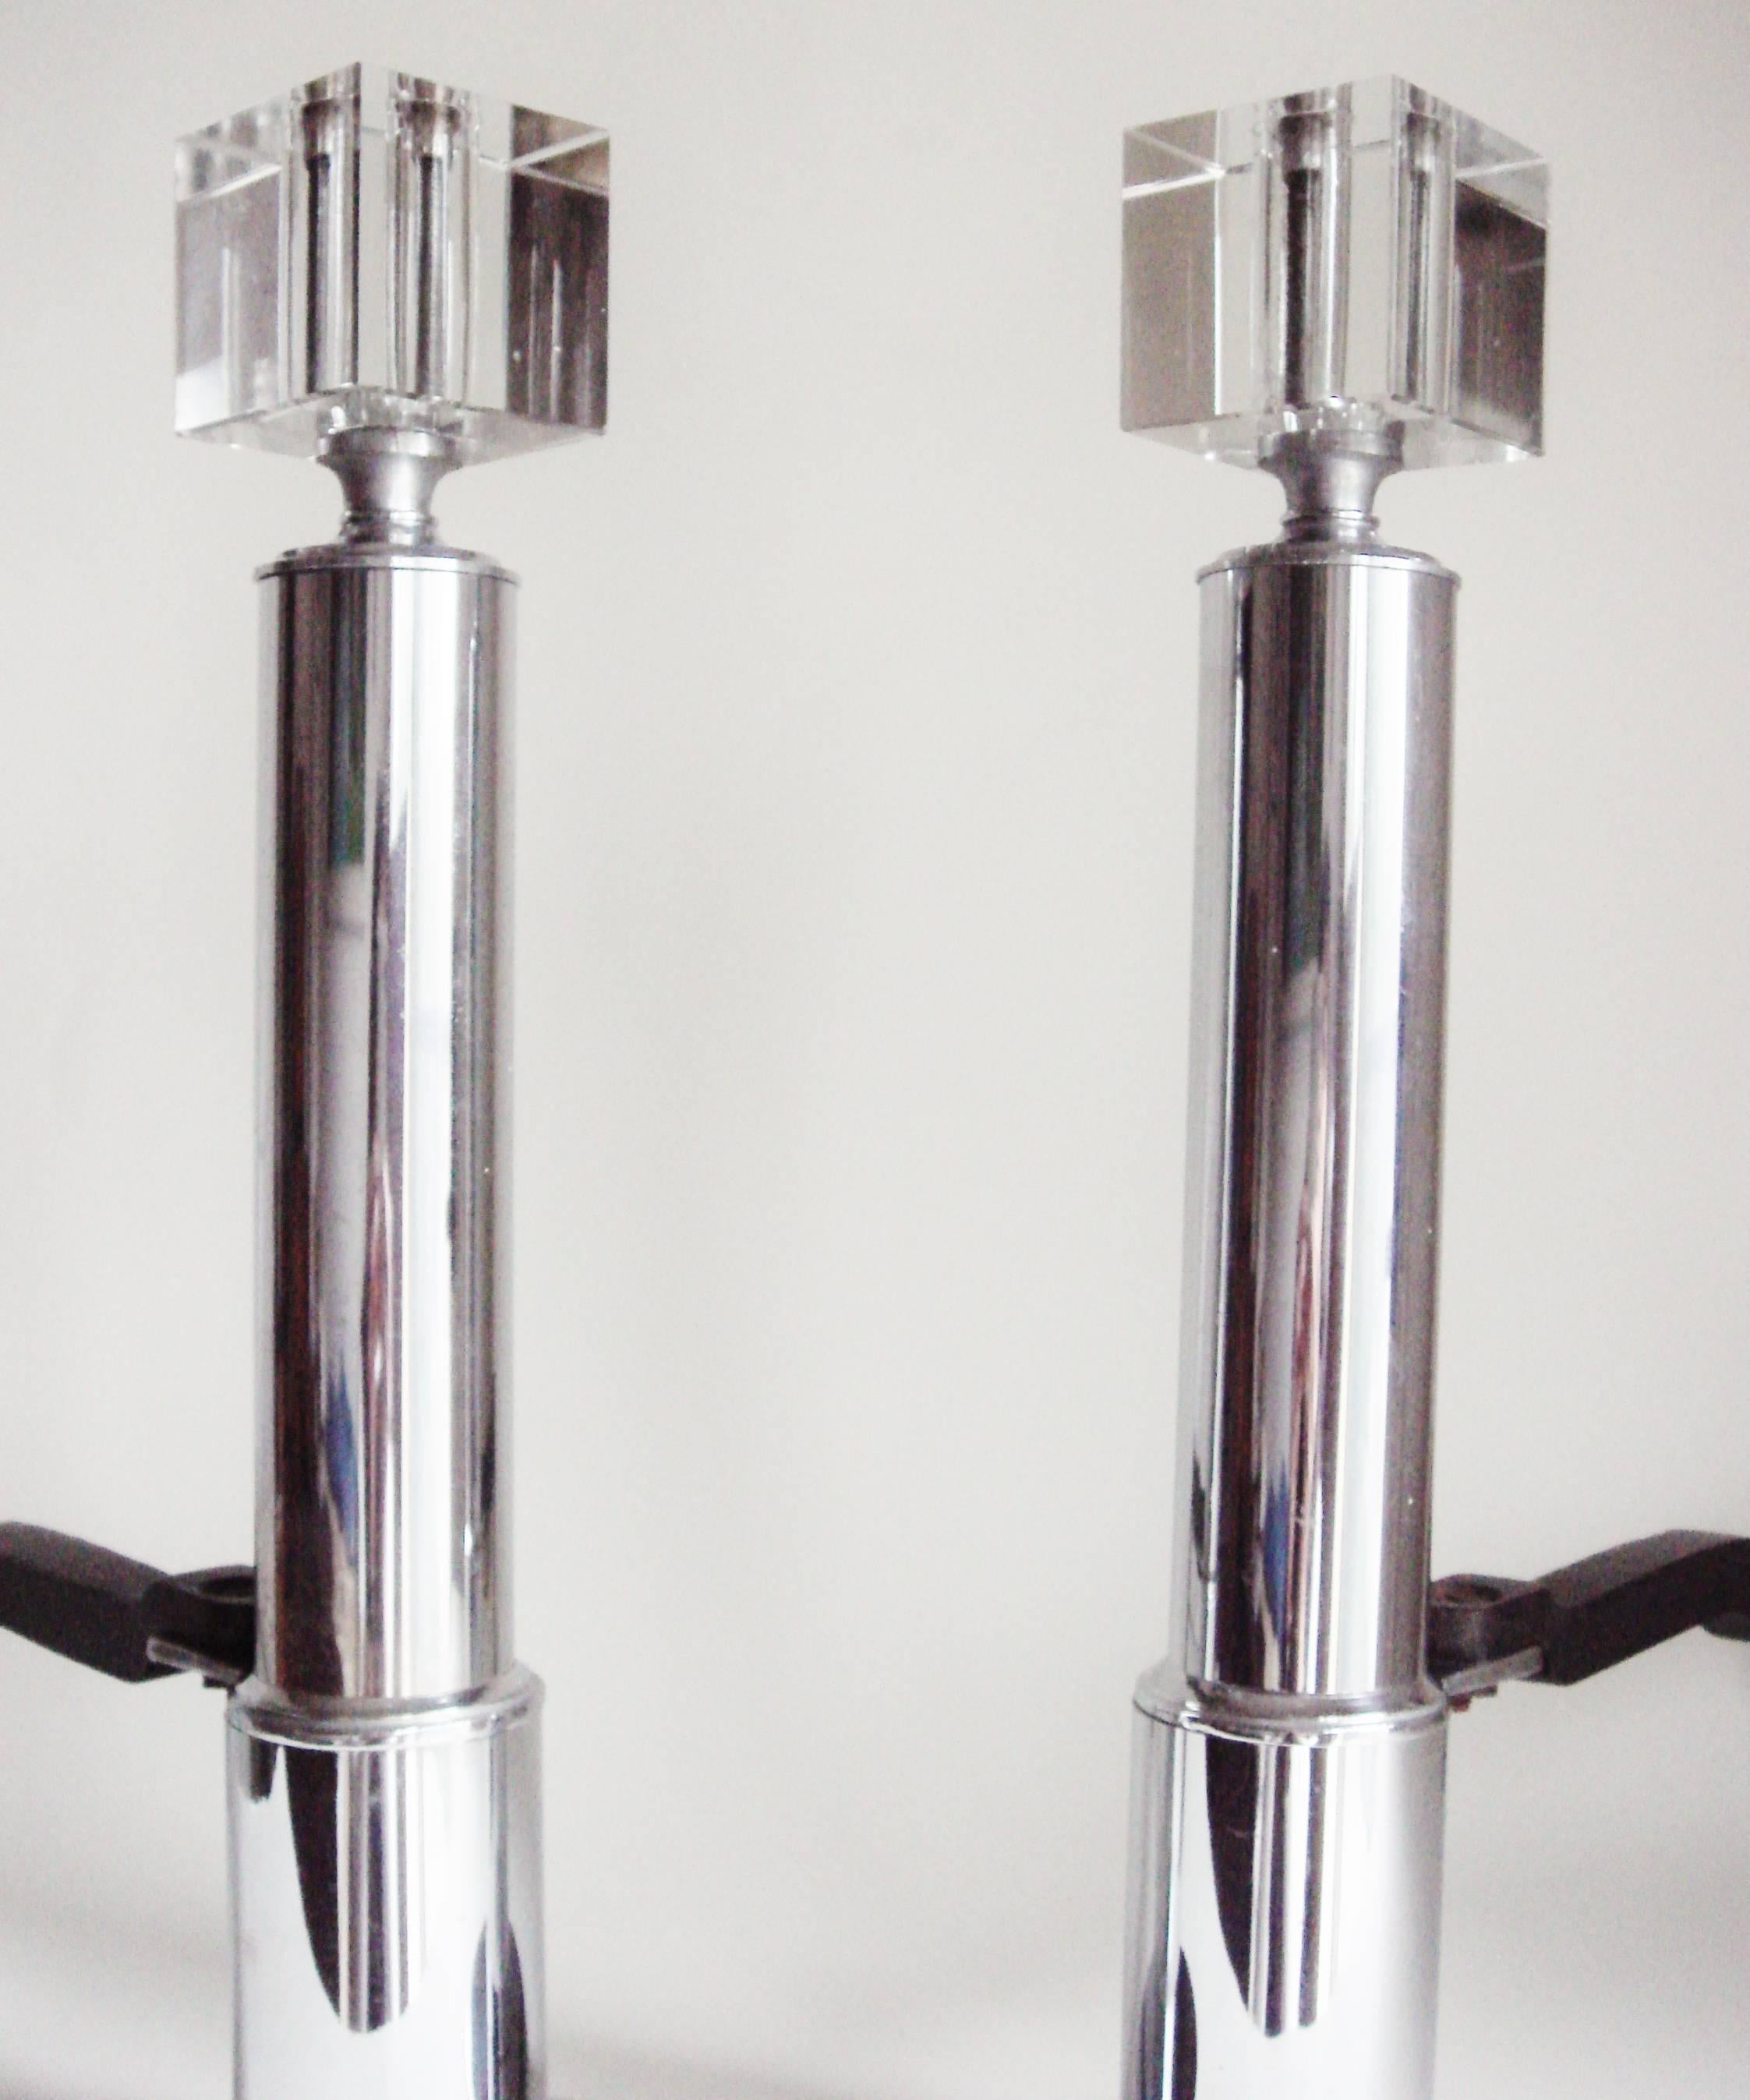 Pair of American Art Deco Chrome, Glass and Forged Iron Geometric Andirons 1